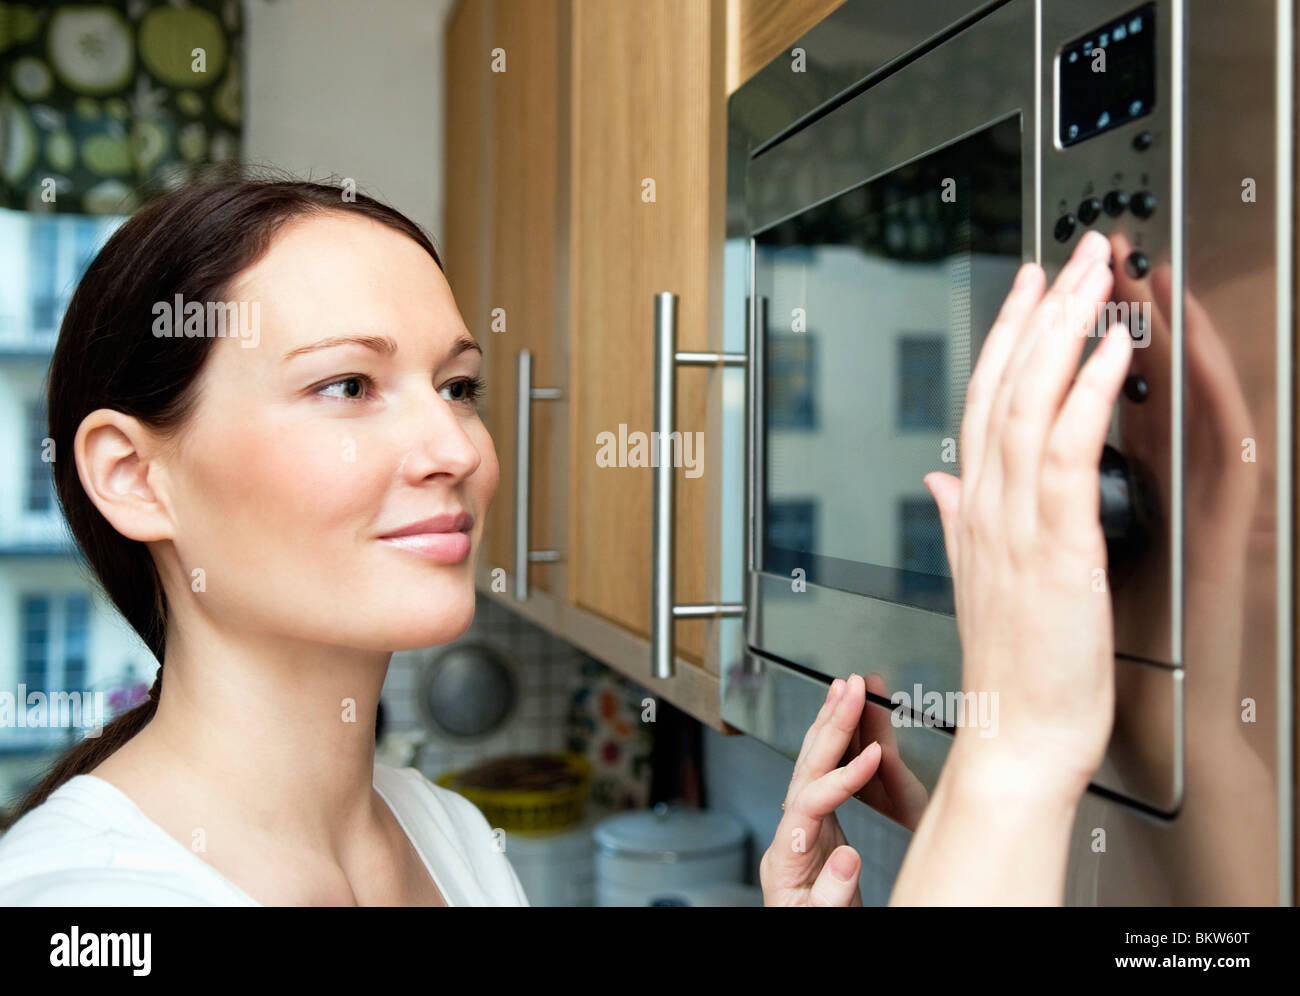 Woman using microwave oven Stock Photo